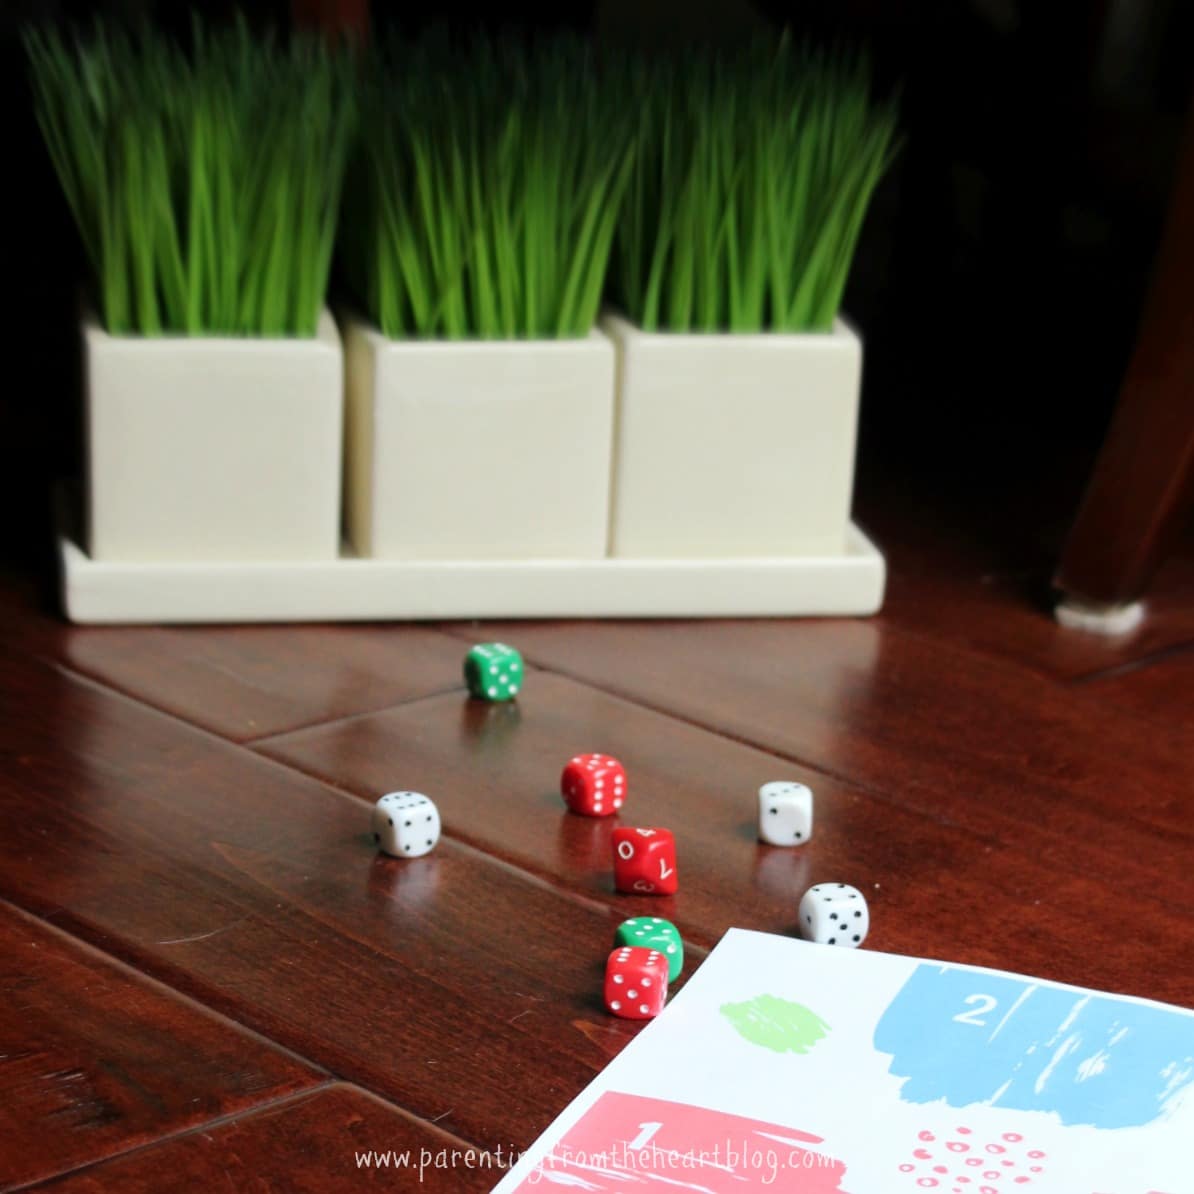 Dice Games for Preschoolers: Fun ways to promote numeracy